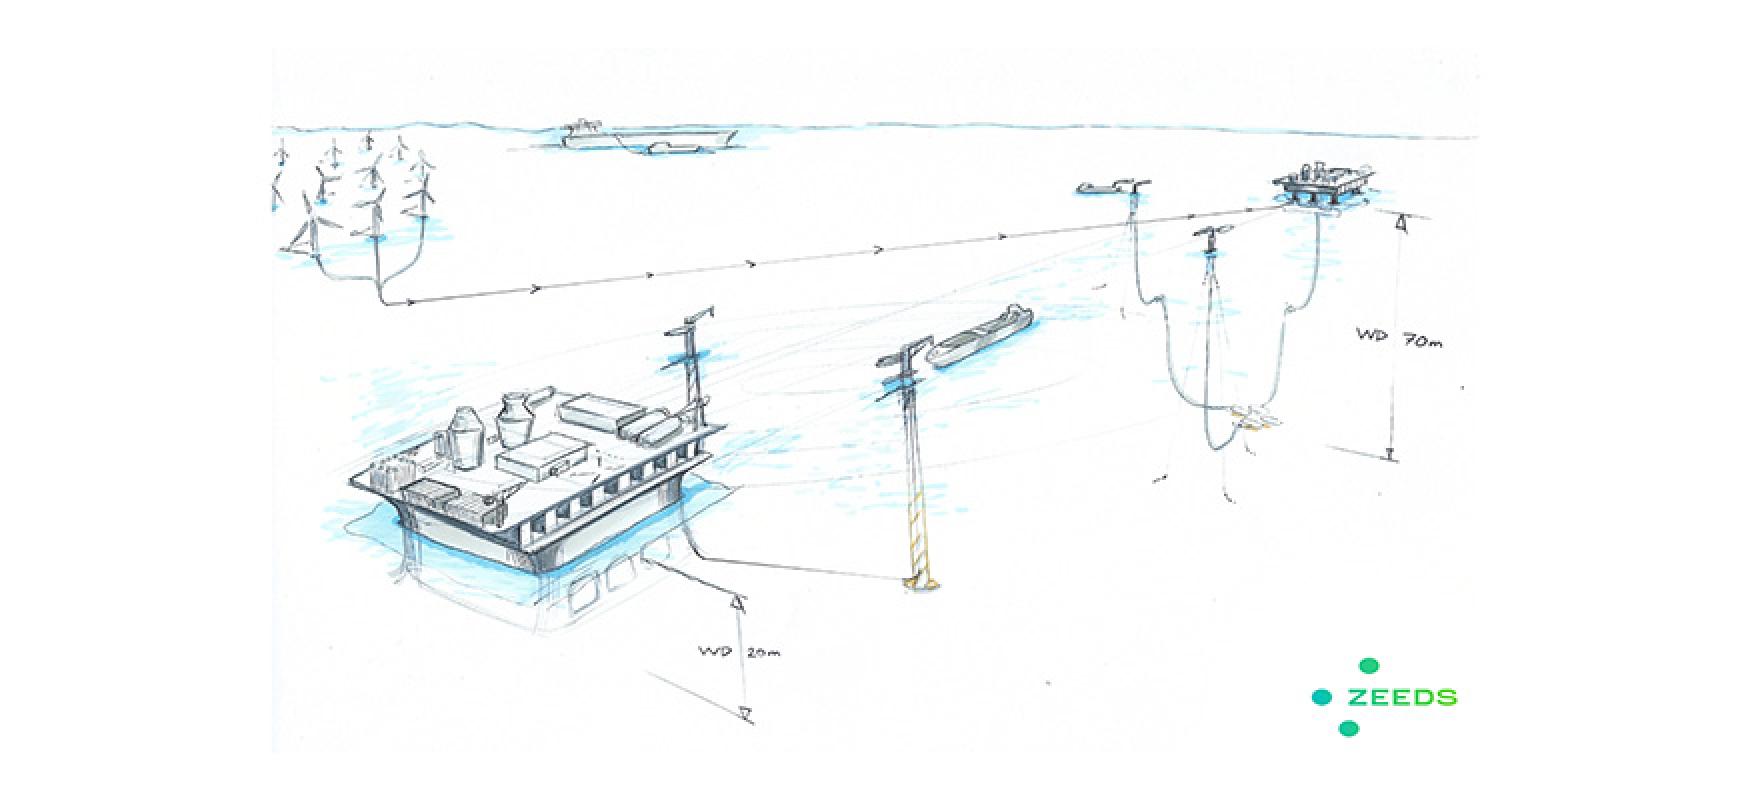 Project sketch illustrating a shipping lane, ship and windmills.